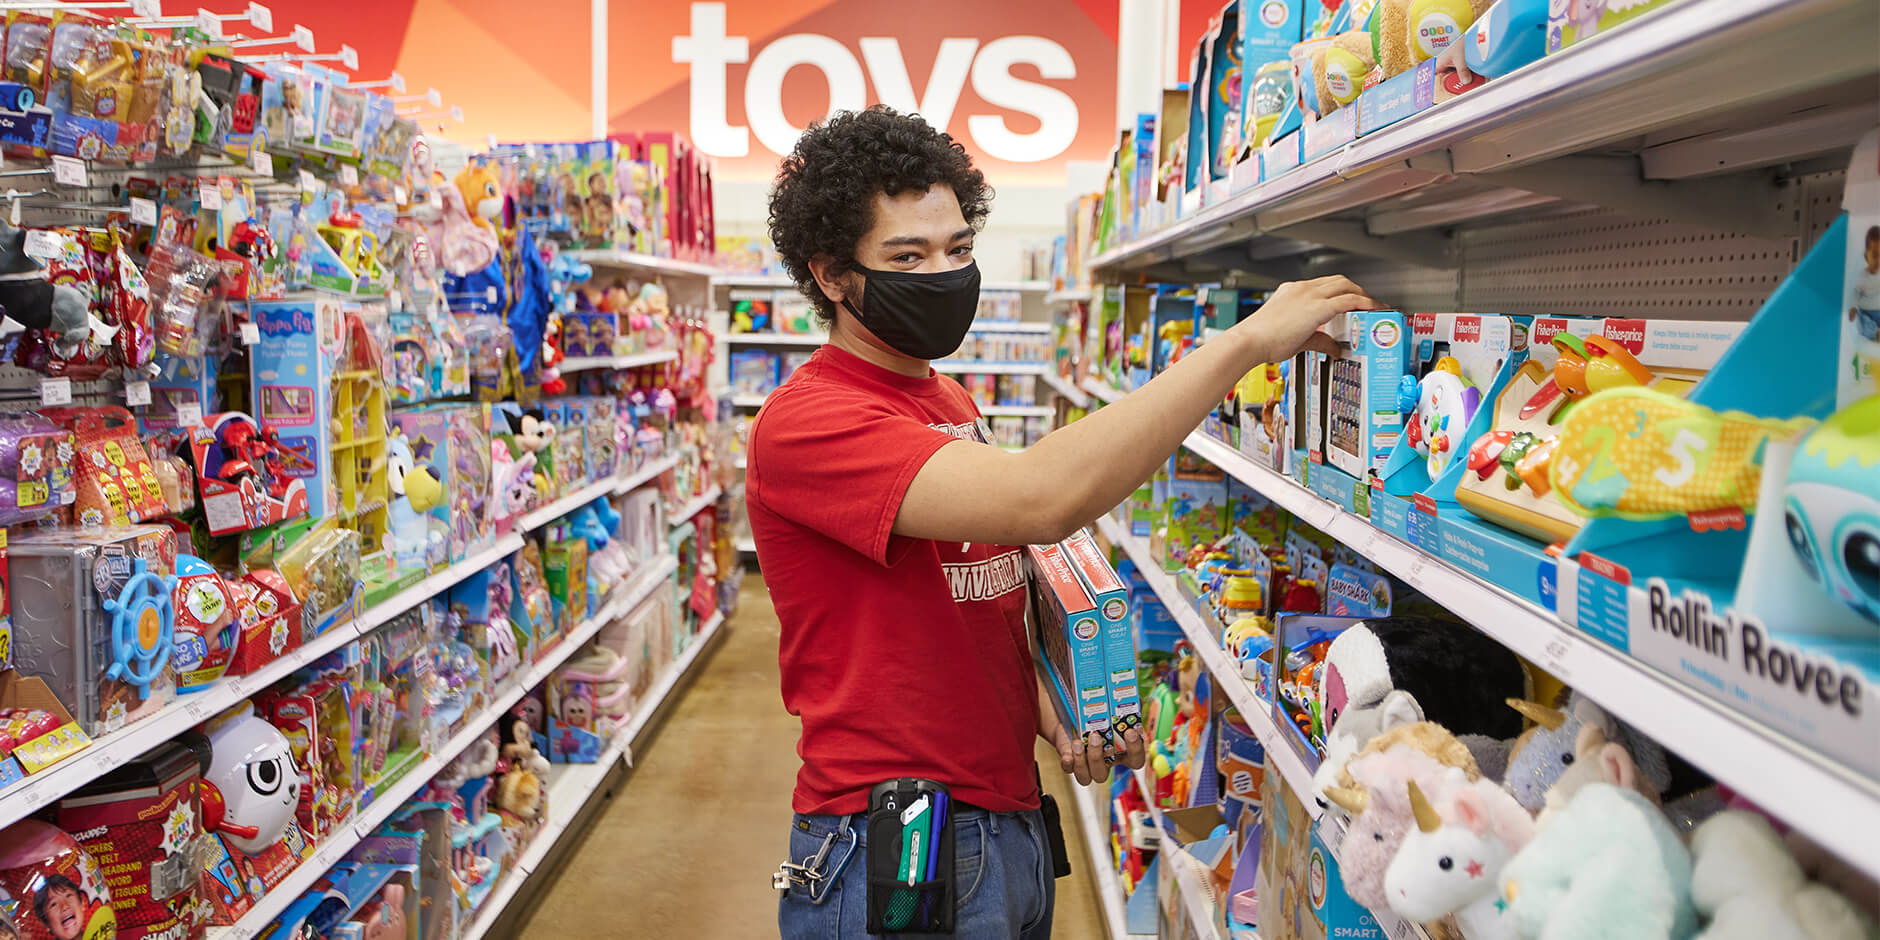 "A Target team member in red shirt and black mask reaches to stock more toys on a shelf."